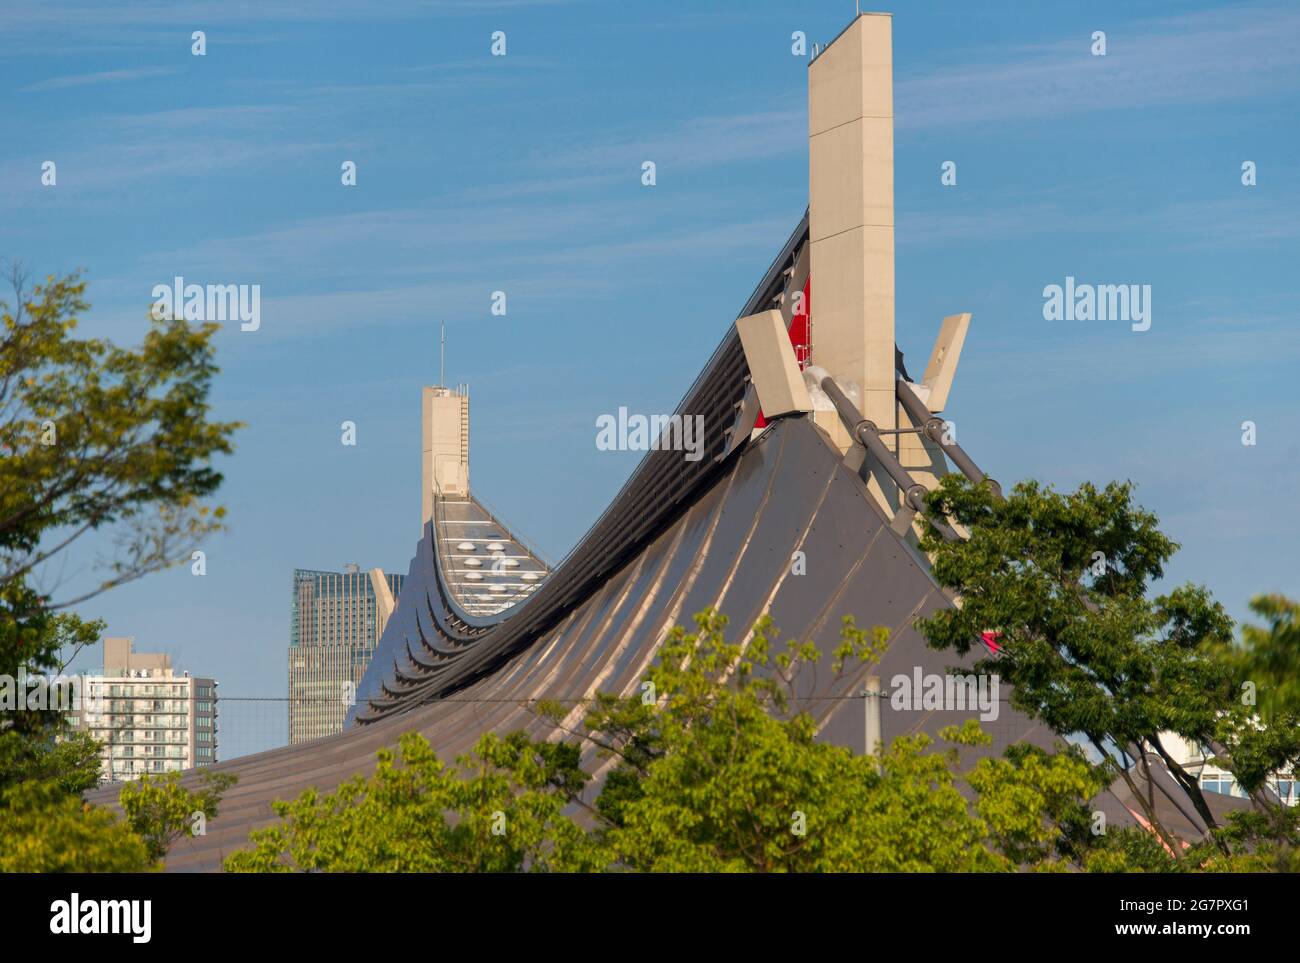 Photo shows the roof of the Kenzo Tange-designed Yoyogi National Gymnasium in Tokyo on 21 June 2021. The gym was used during the 1964 Tokyo Olympics for aquatics events. Robert Gilhooly photo Stock Photo